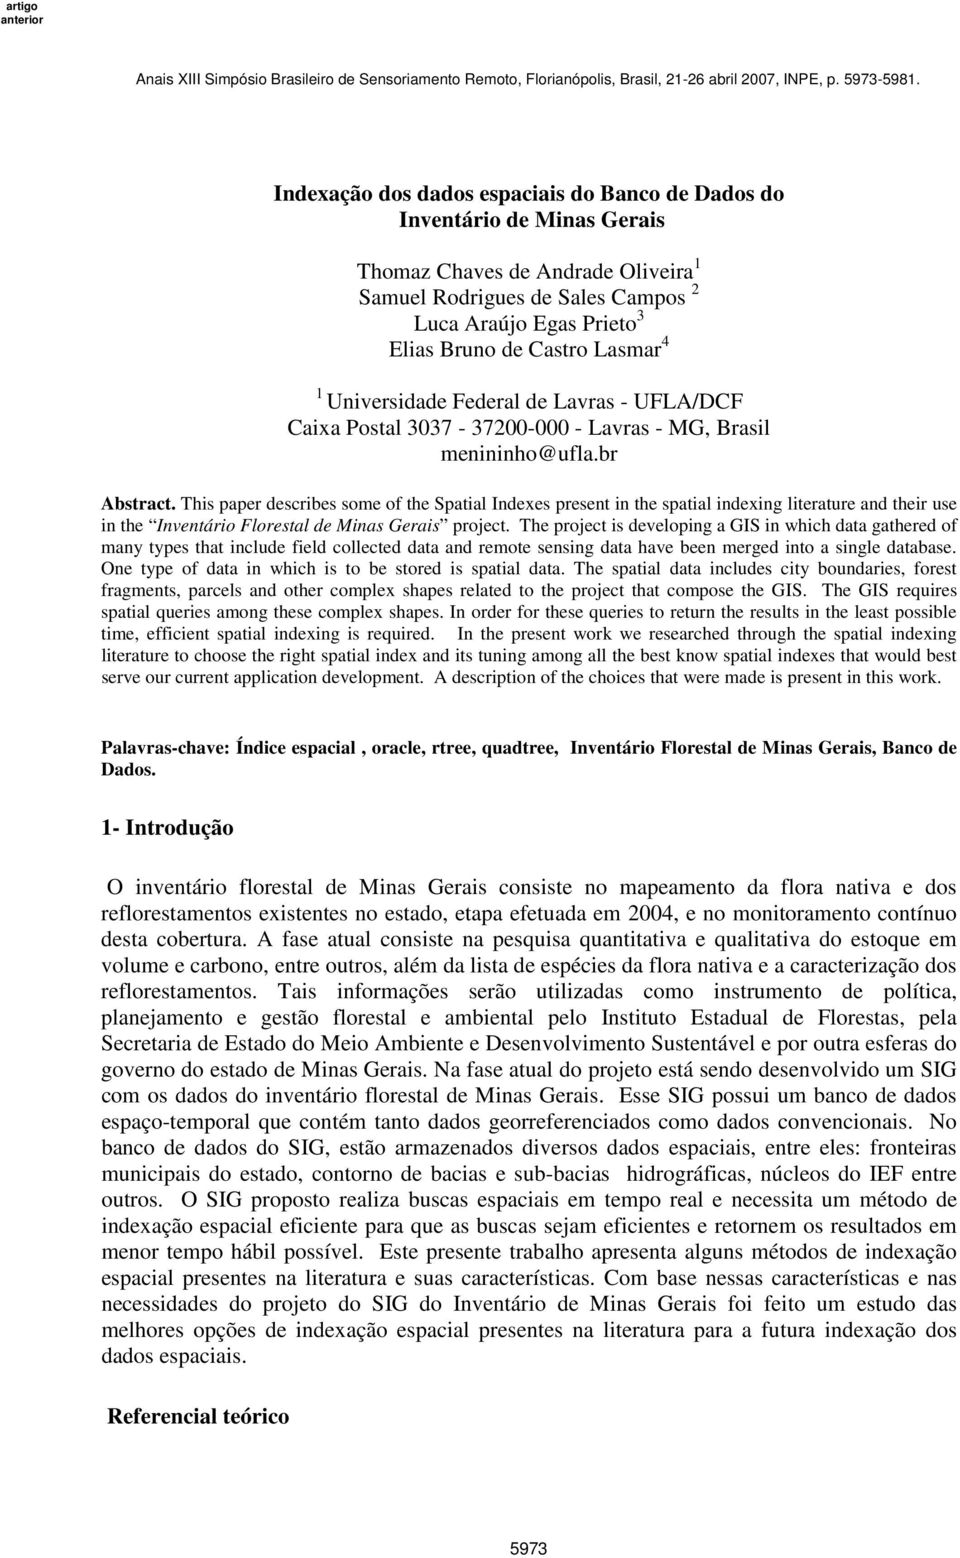 This paper describes some of the Spatial Indexes present in the spatial indexing literature and their use in the Inventário Florestal de Minas Gerais project.